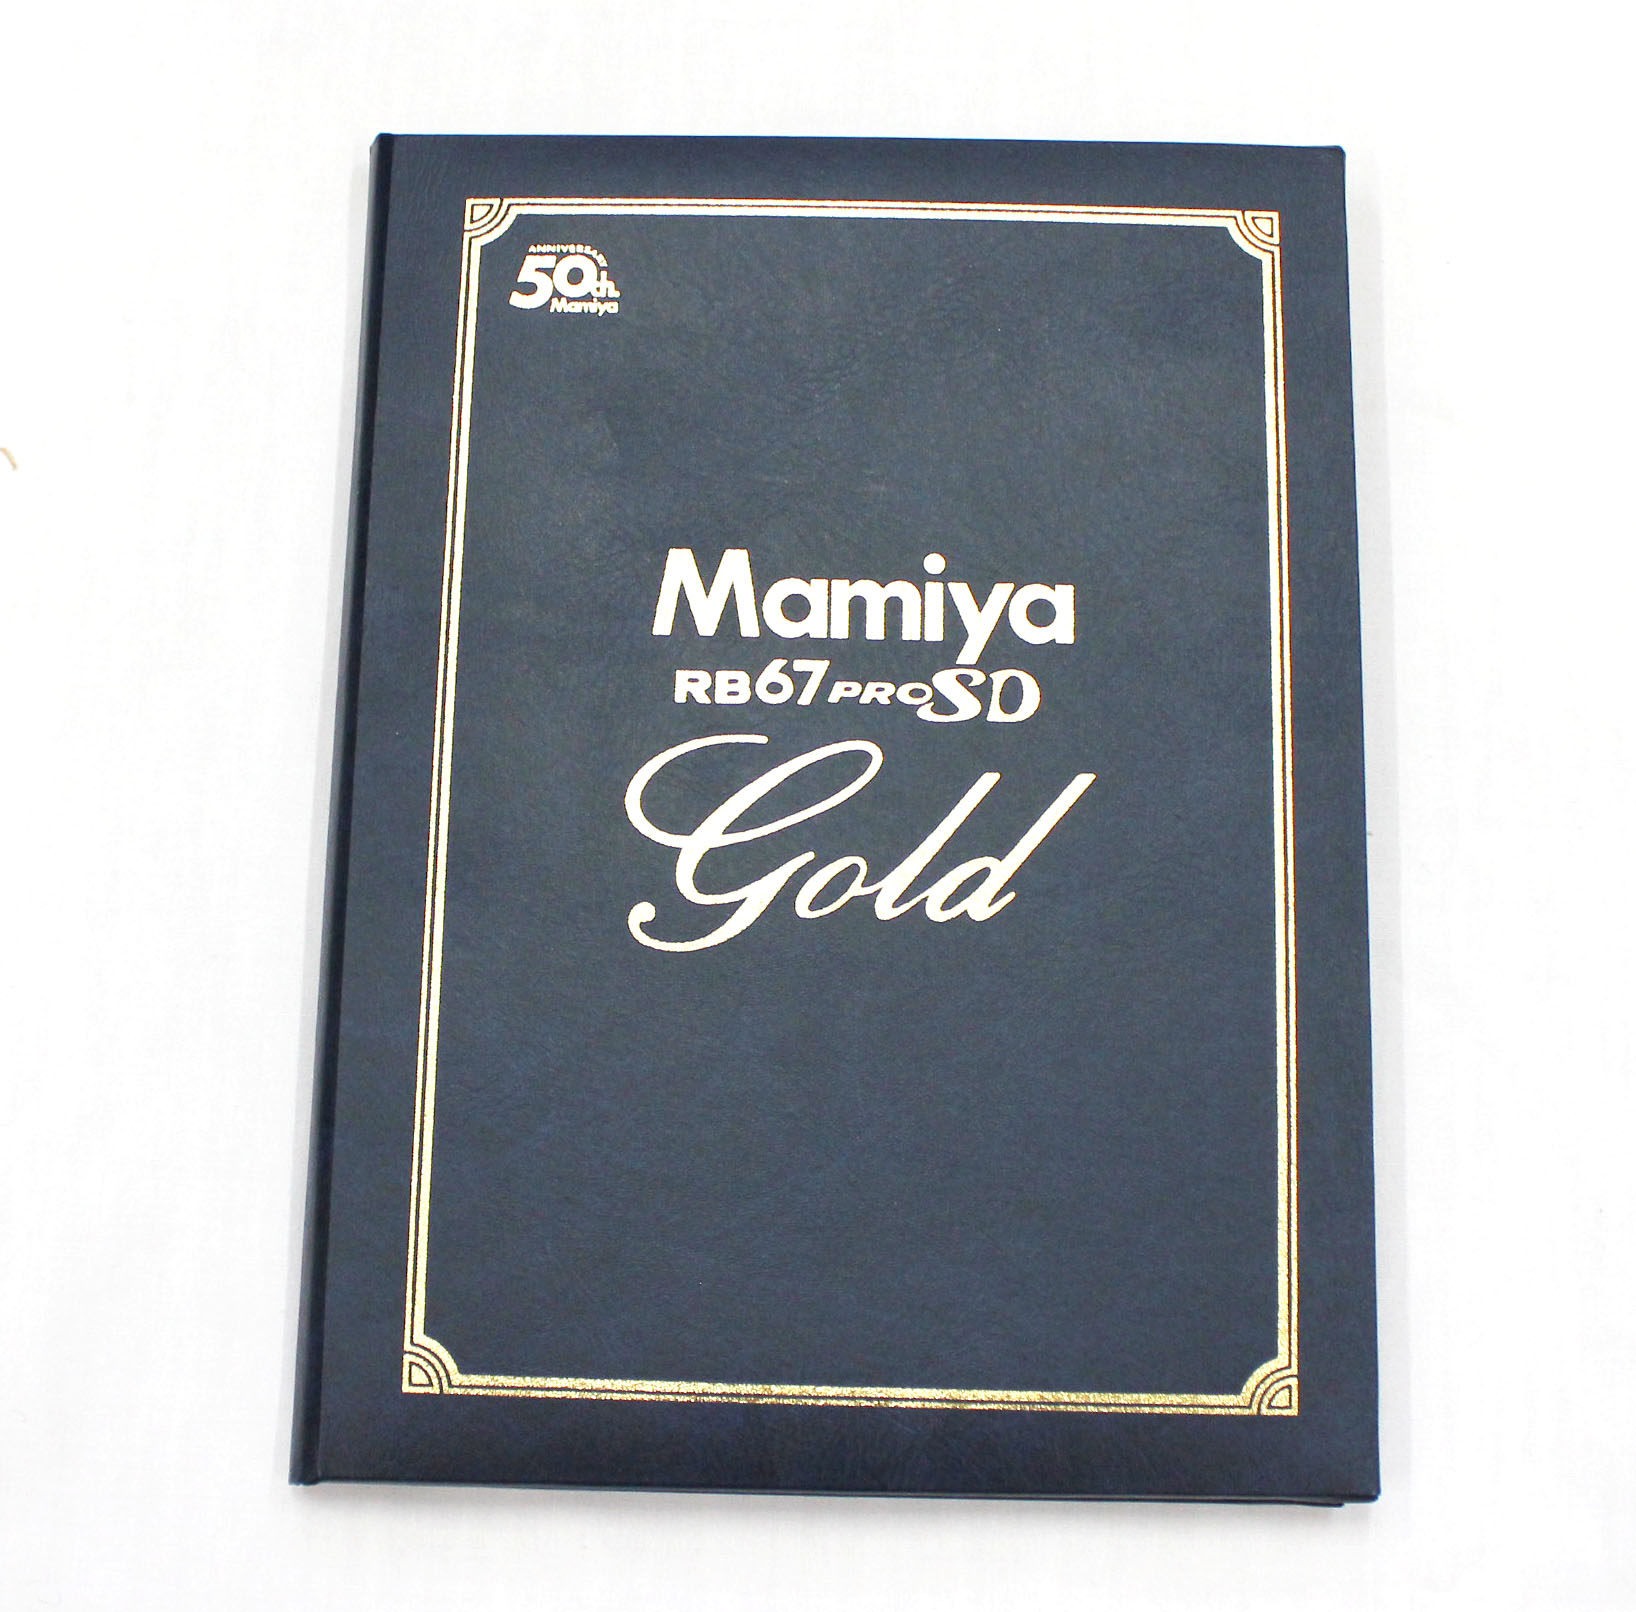 Mamiya RB67 Pro SD Gold K/L 127mm F/3.5 50 Years Limited Edition of 300 from Japan Photo 22